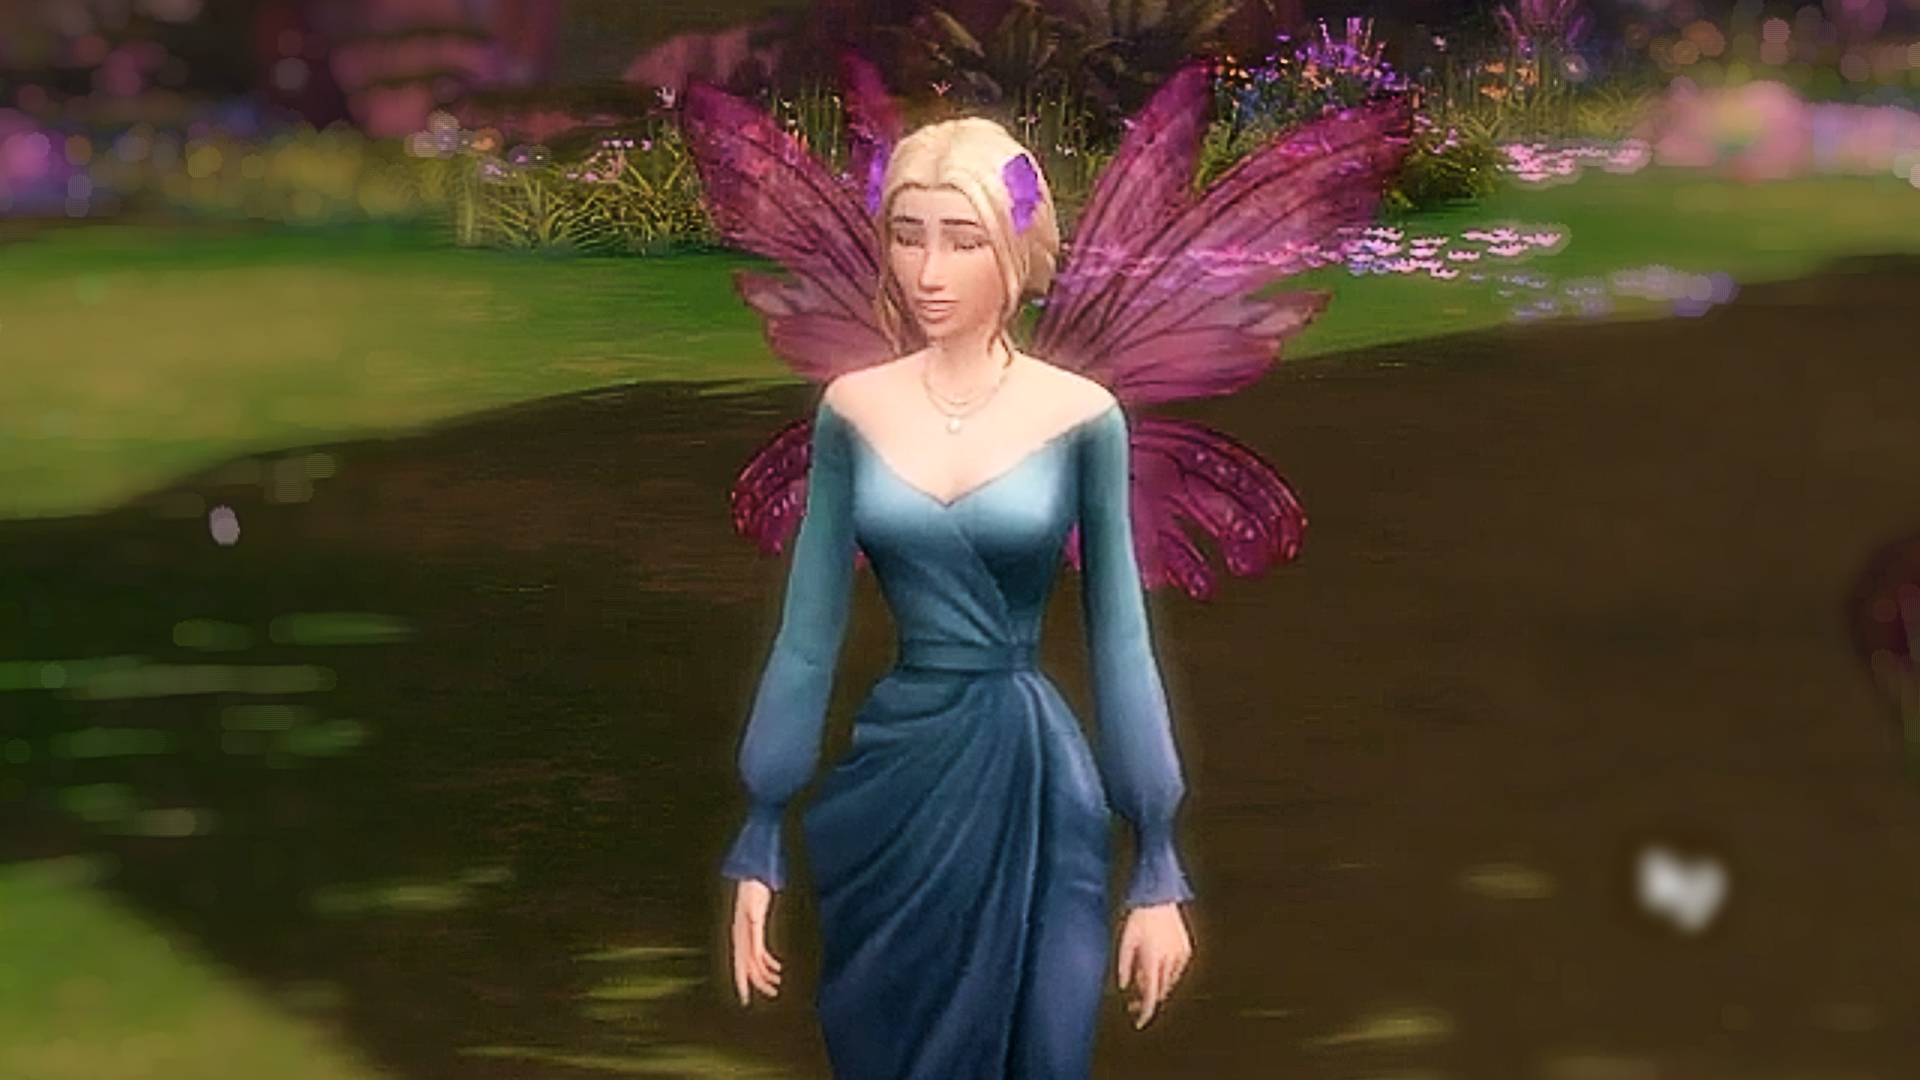 The Sims 4 finally has fairies, thanks to new wand-erful mod